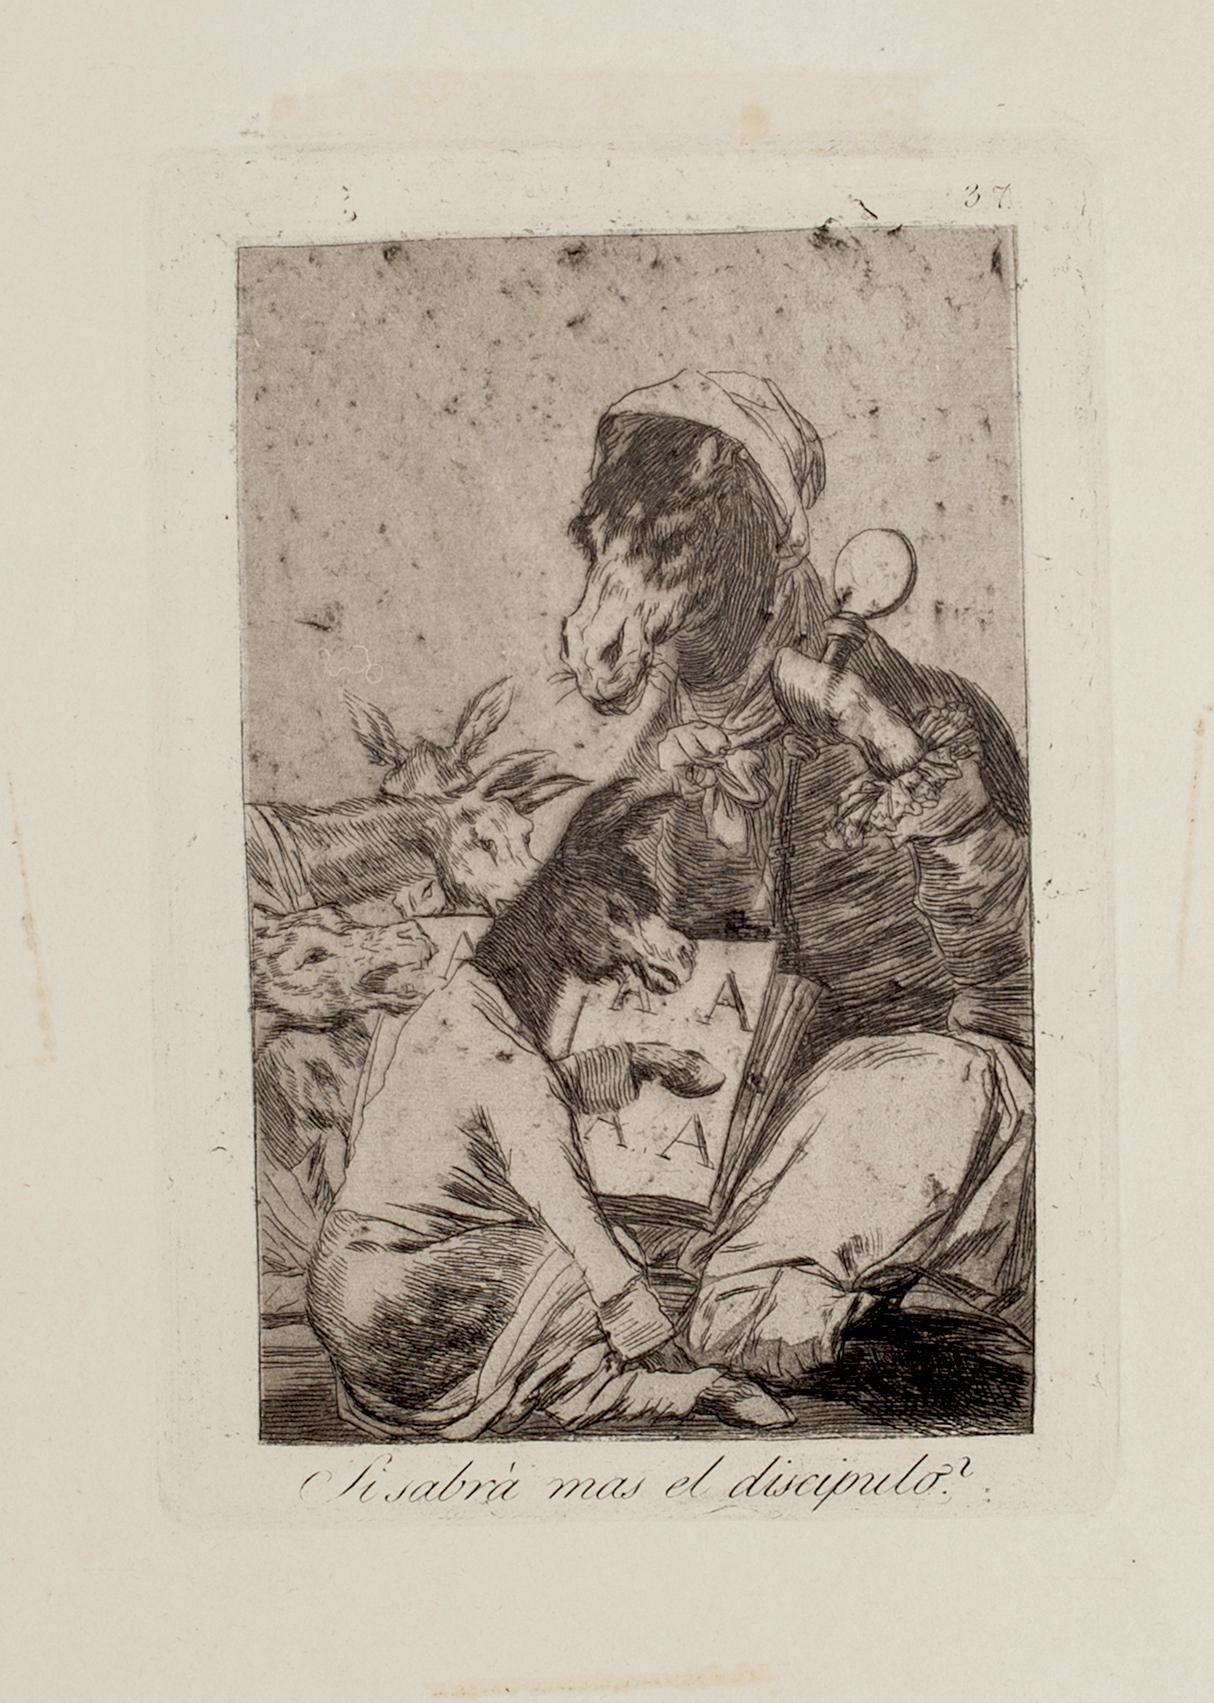 ¿Si sabra más el discípulo? is an original etching realized by the great Spanish artist Francisco Goya and published in 1799.

Original etching on wove paper. Image dimensions: 21.5 x 15 cm.

The plate belongs to the Third Edition of "Los Caprichos"